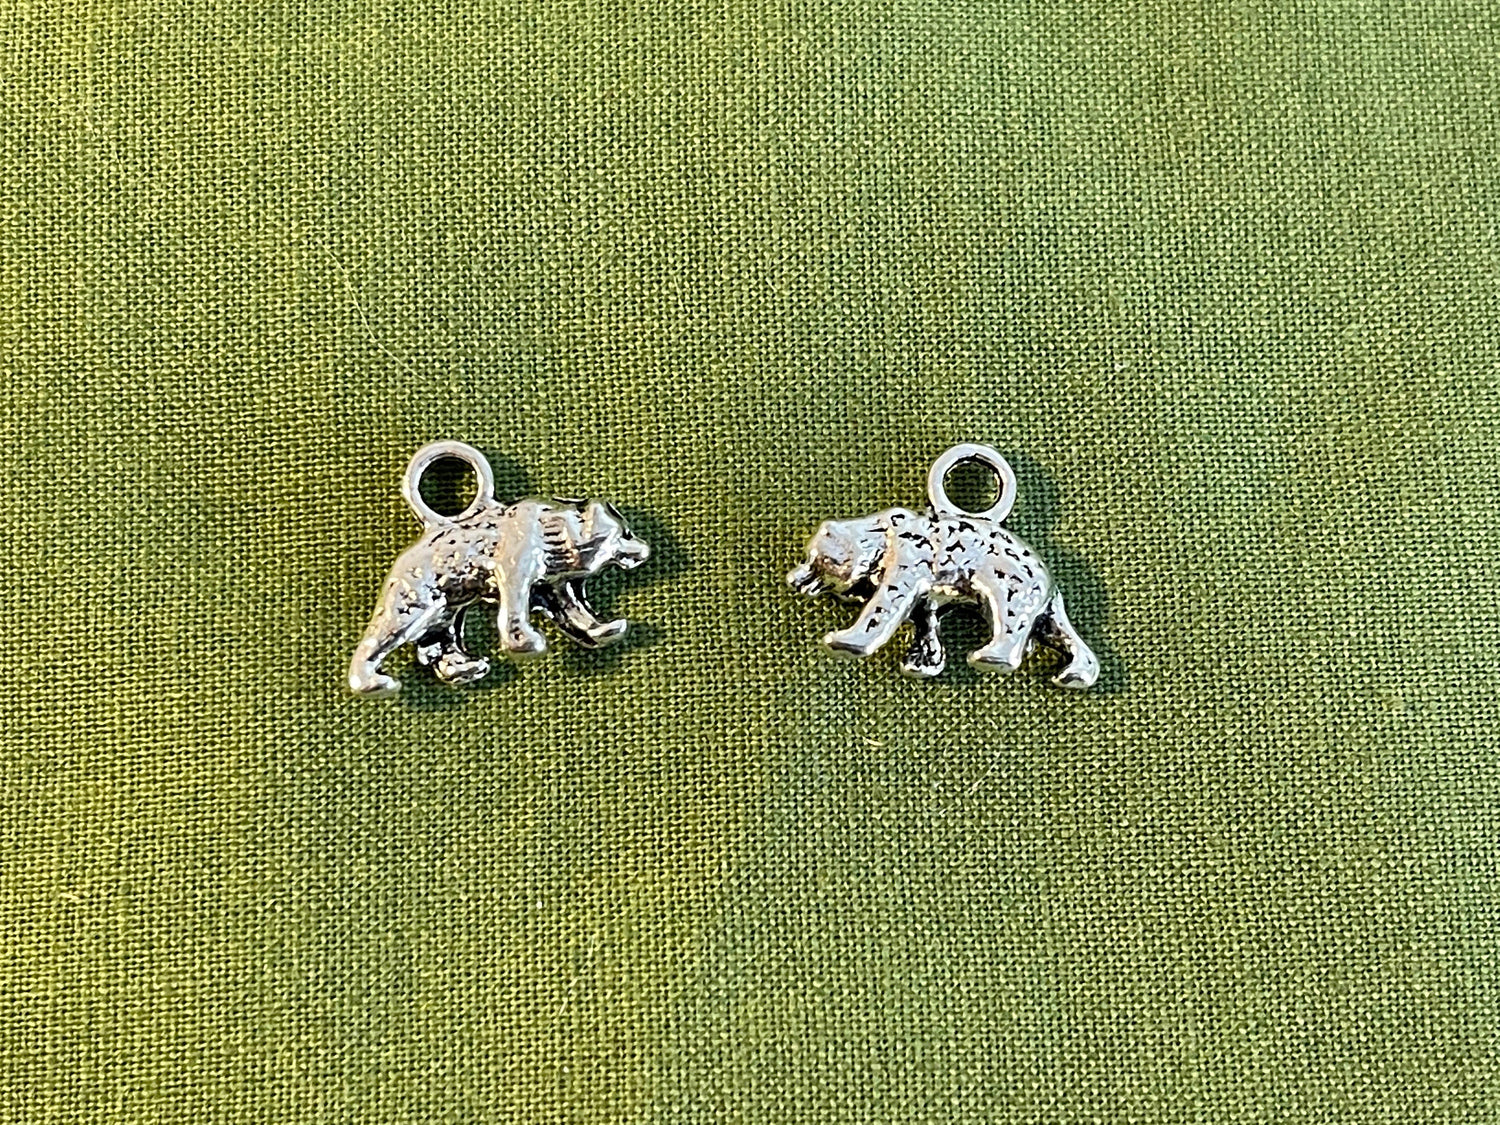 Woodland animals 3D charms–bear, fox, fawn, squirrel–choose one or set–realistic forest creature antique silver charm, pendant for jewelry